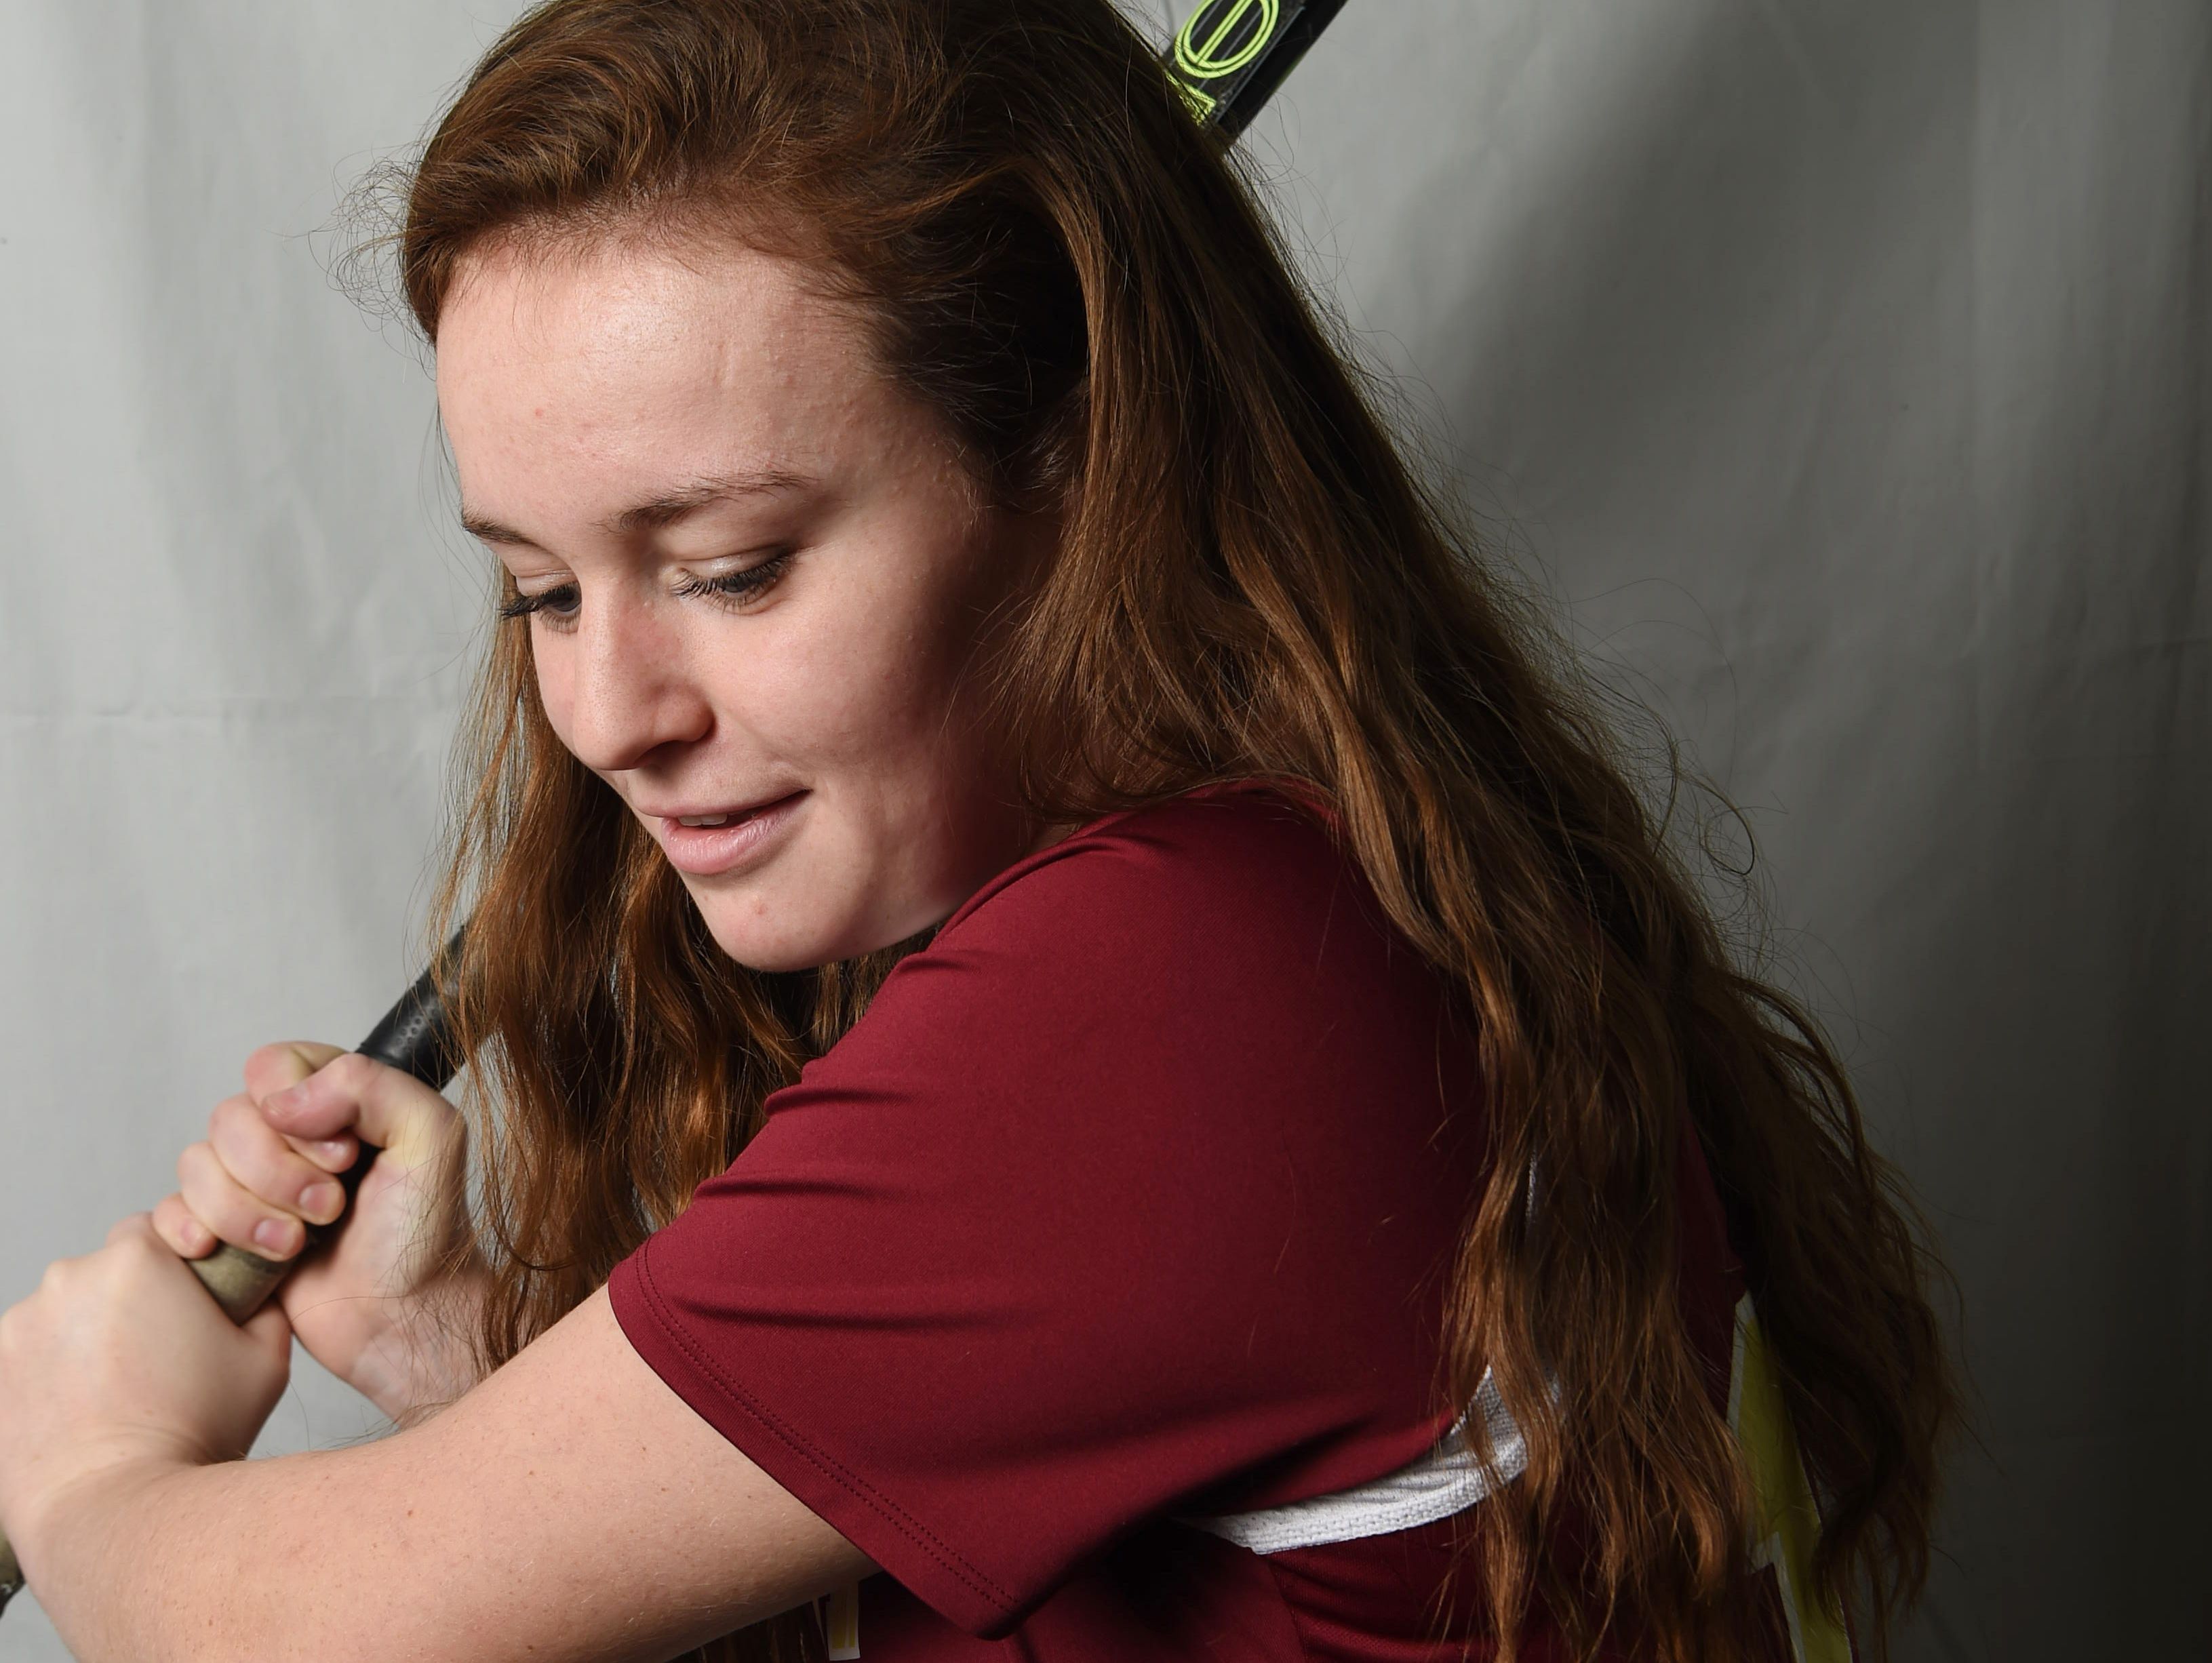 Audrey Trainor from Arlington High School is the field hockey Offensive Player of the Year.